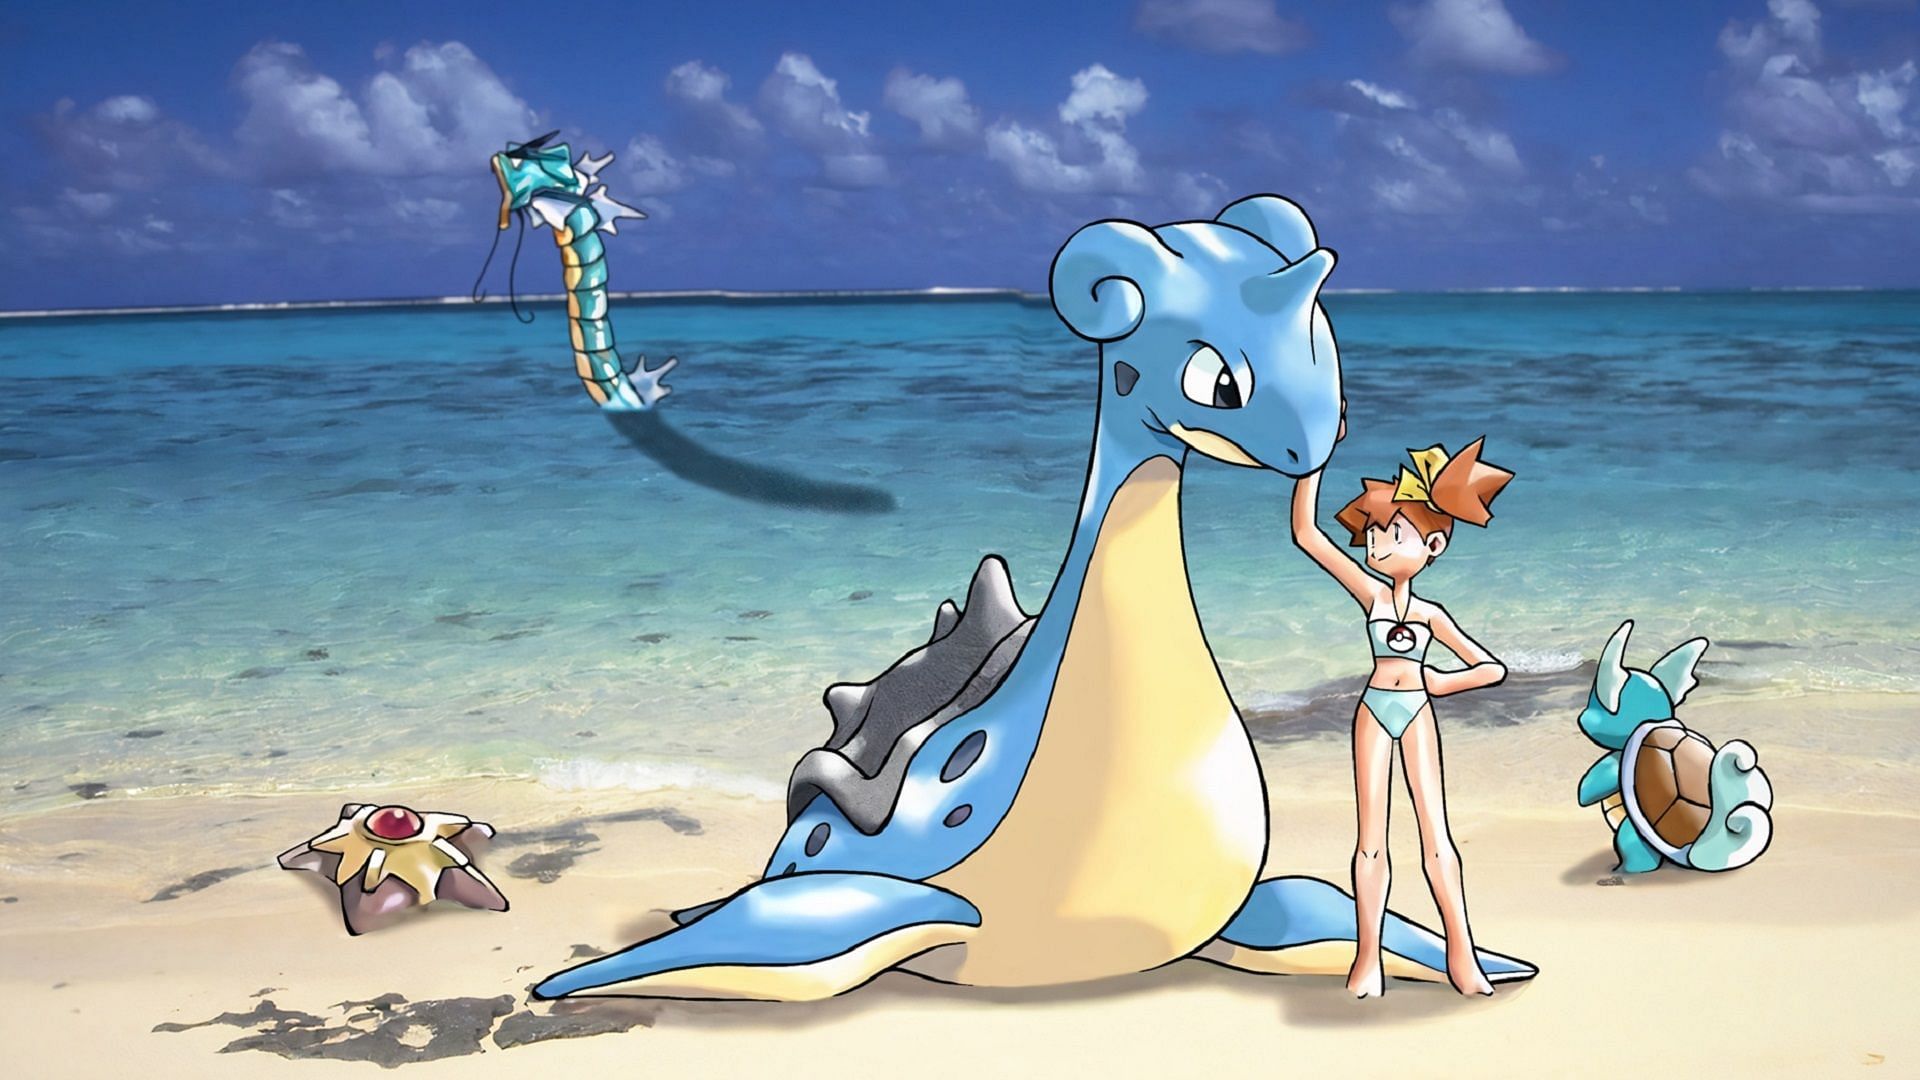 Official art for Lapras by Pokemon Red and Blue artist Ken Sugimori (Image via The Pokemon Company)